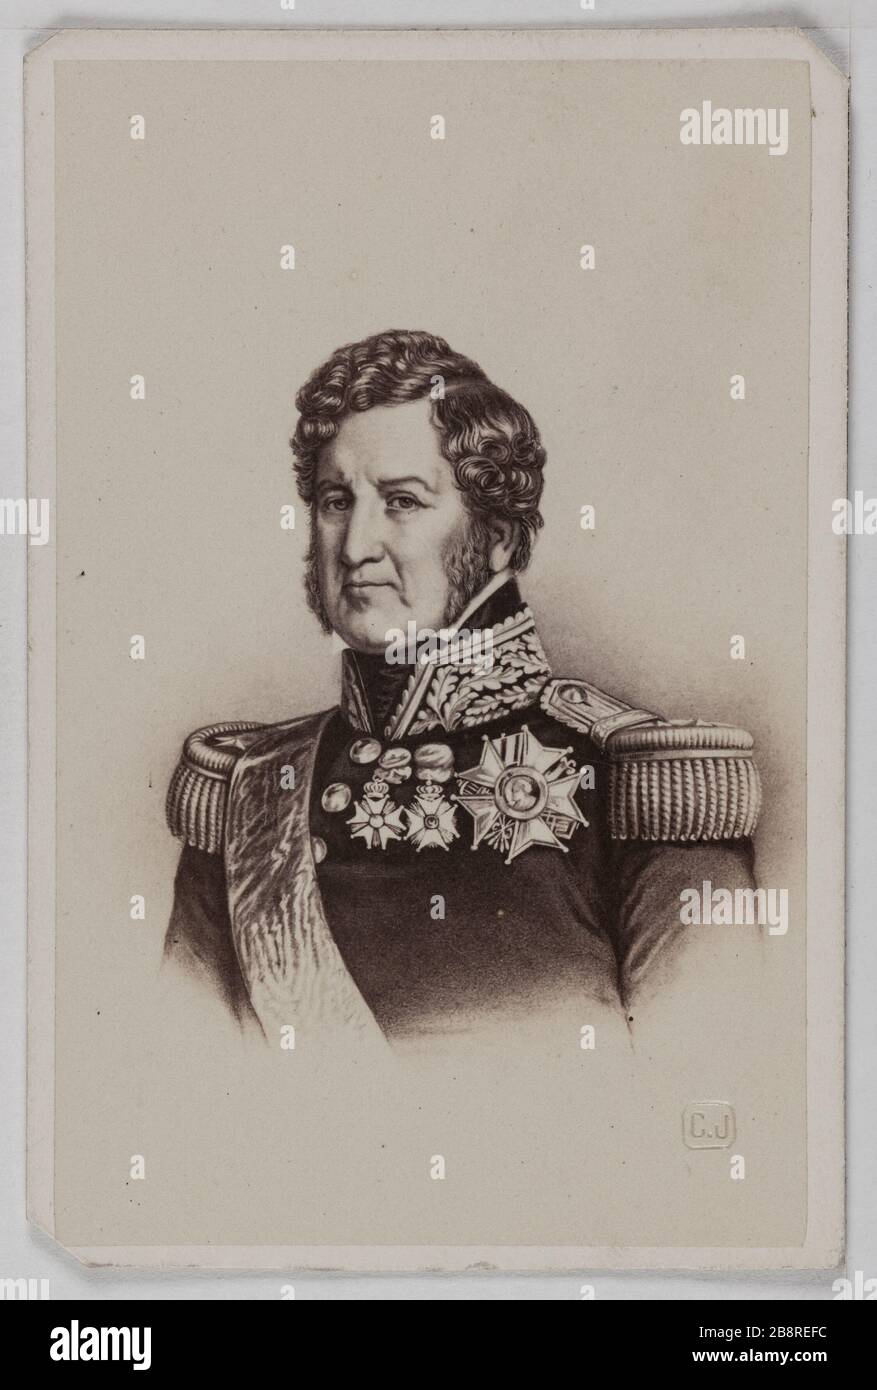 LOUIS PHILIPPE I (1773-1850) French King from 1830-48 painted by Franz  Winterhalter in 1839 Stock Photo - Alamy